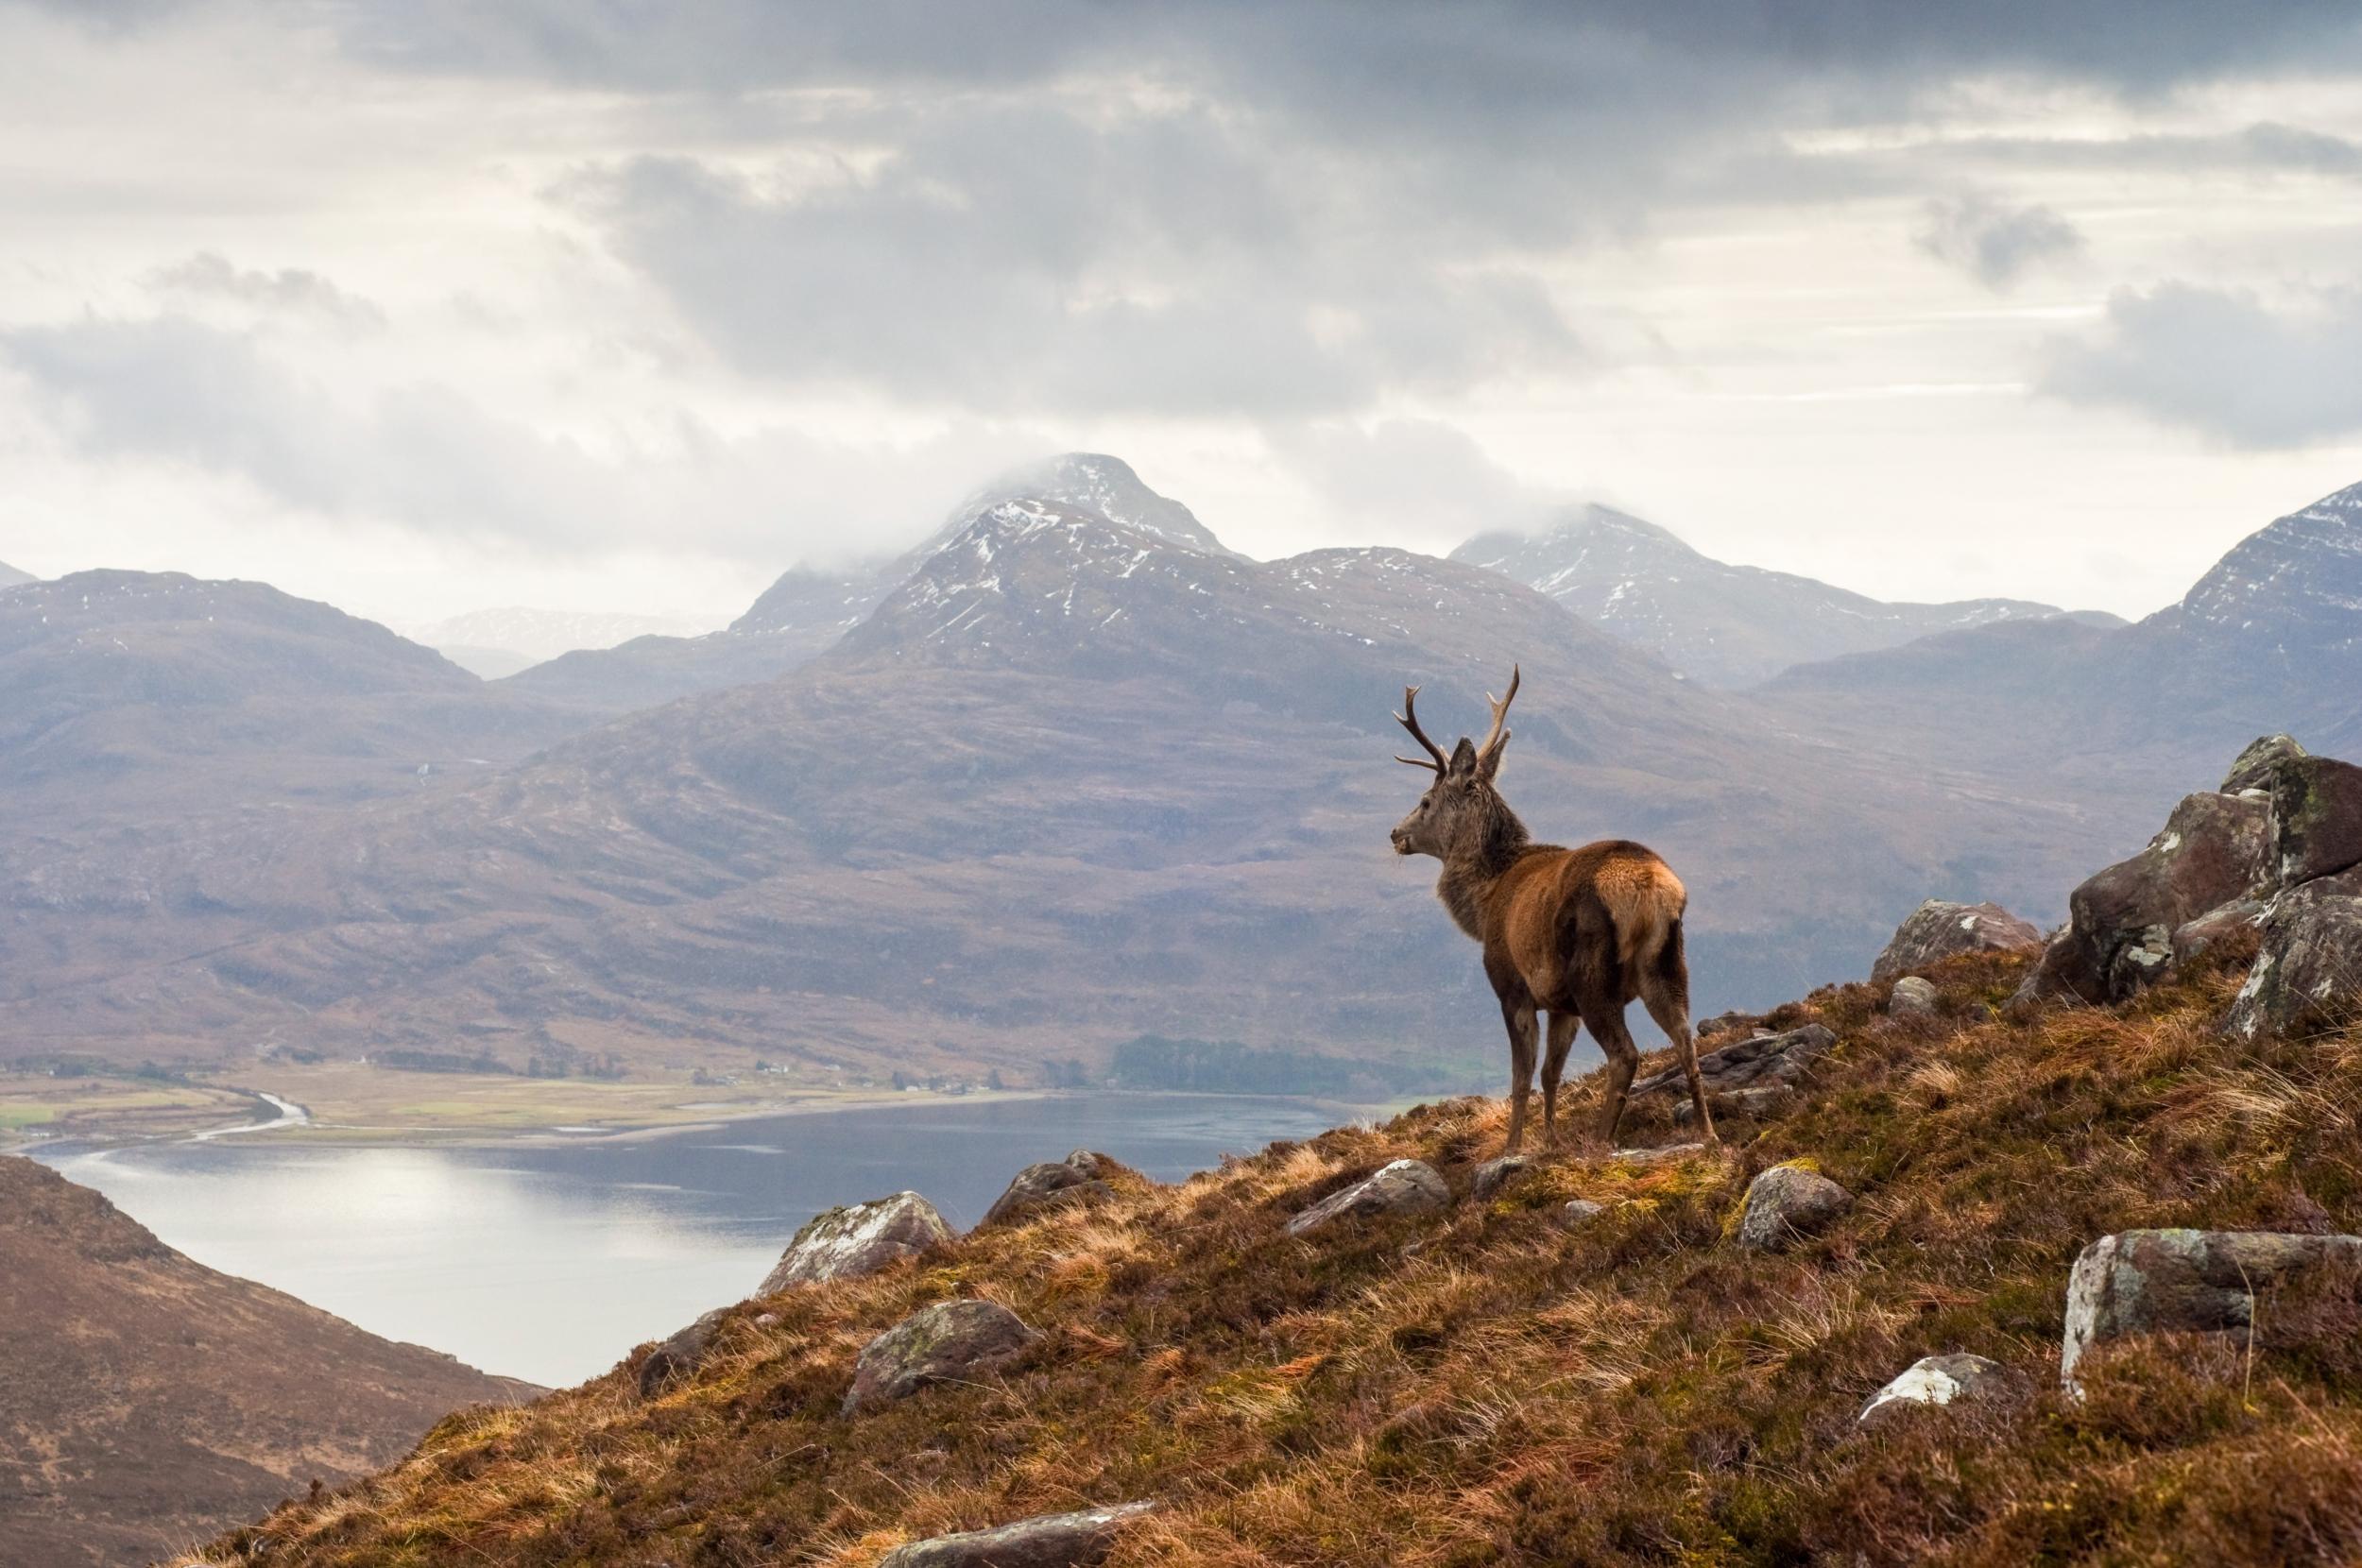 The Scottish Highlands are an animal playground: from stags and mountain hares to deer and grouse